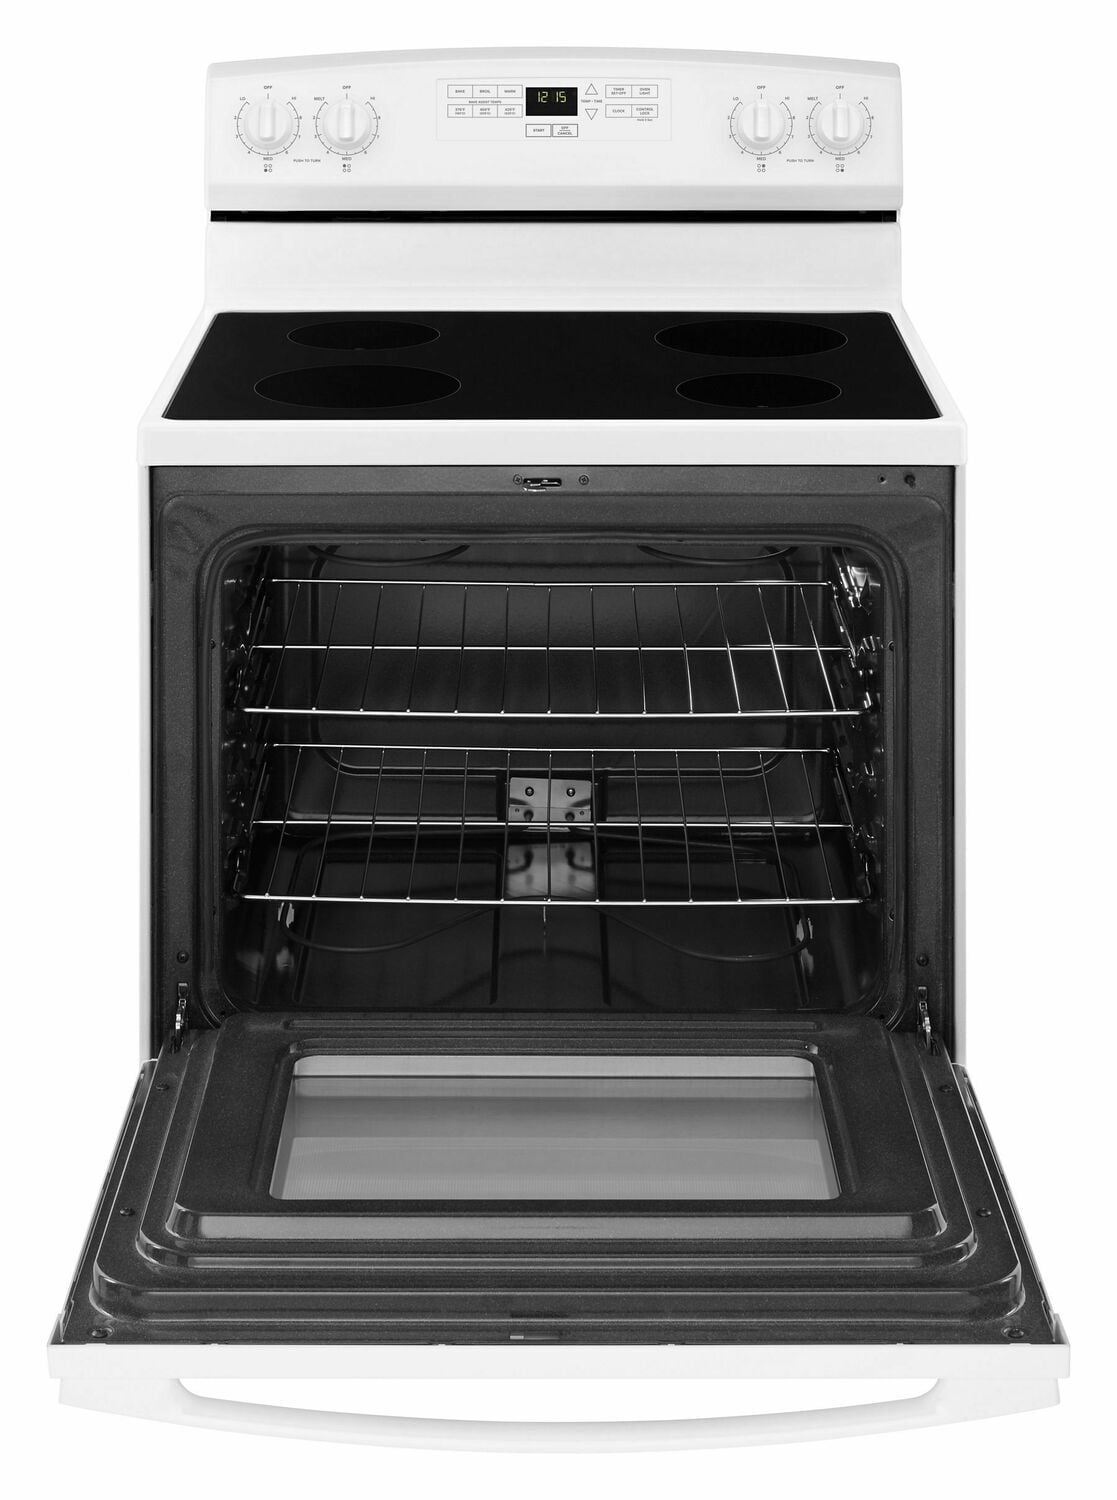 Amana 30-Inch Electric Range with Extra-Large Oven Window